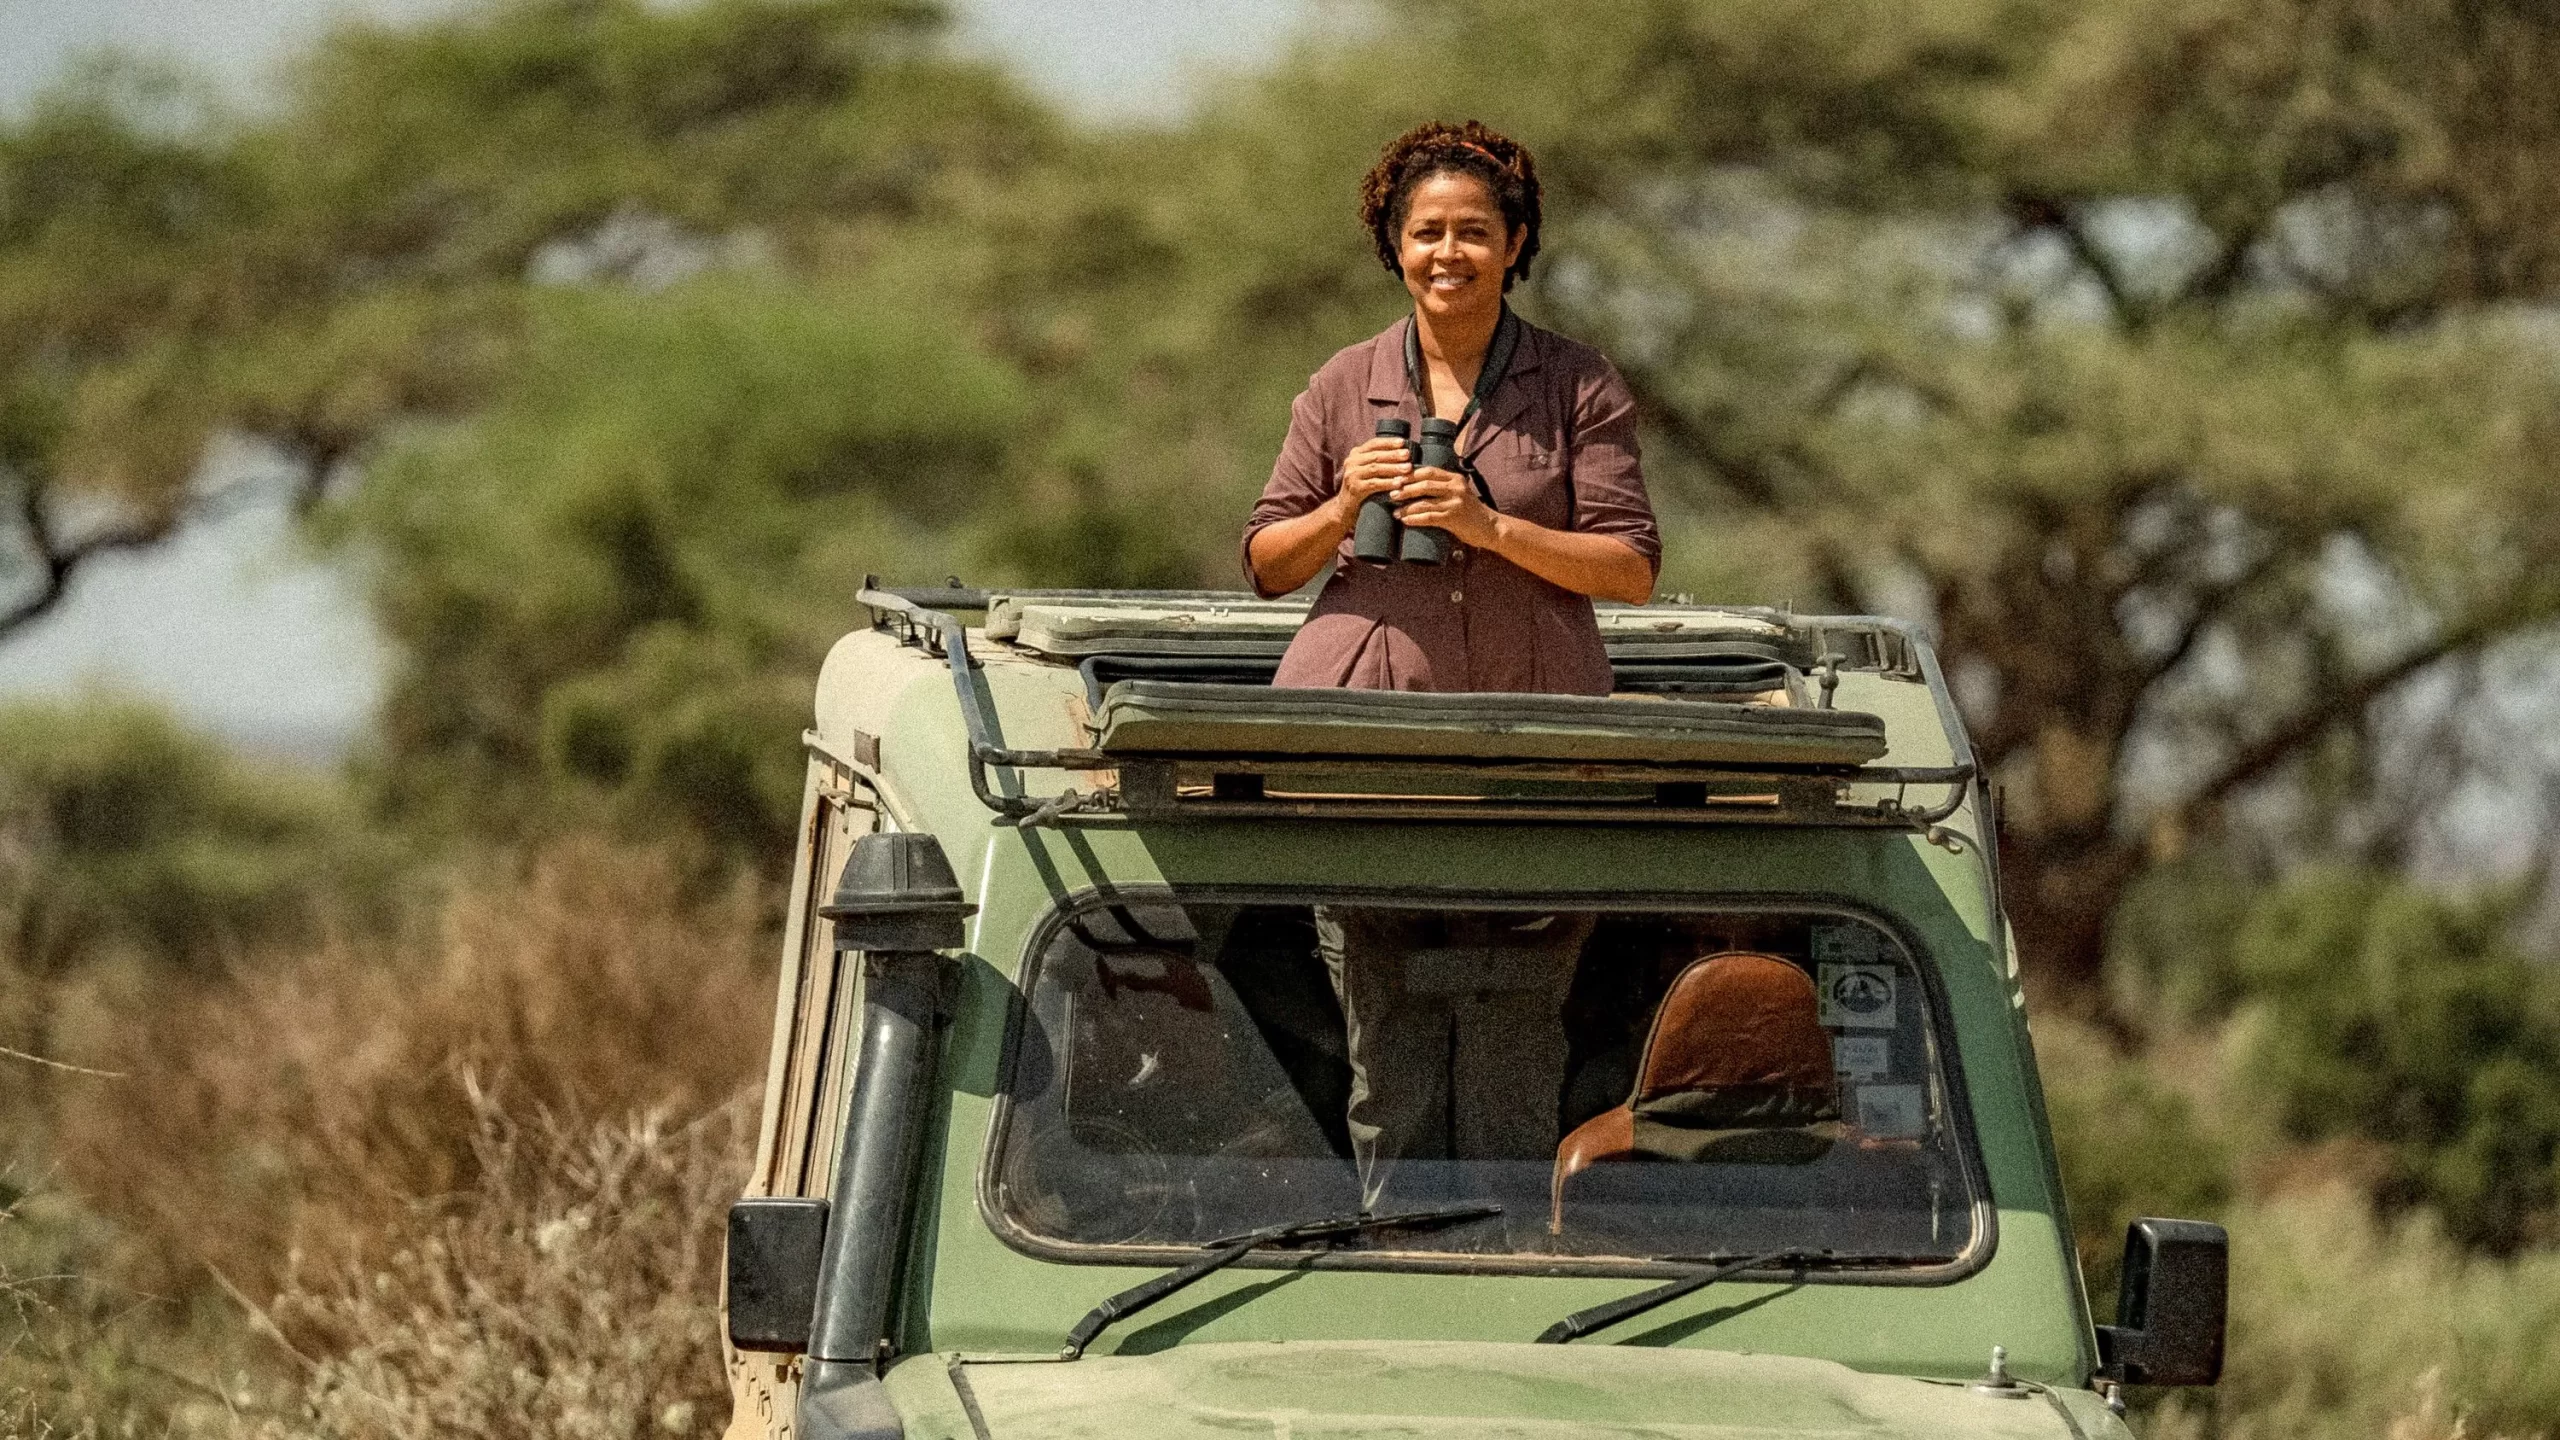 Wildlife expert, Paula Kahumbu, has loved wildlife since she was a child and is now a passionate activist, speaking on behalf of the animals that cant speak for themselves. (National Geographic for Disney/Wim Vorster)